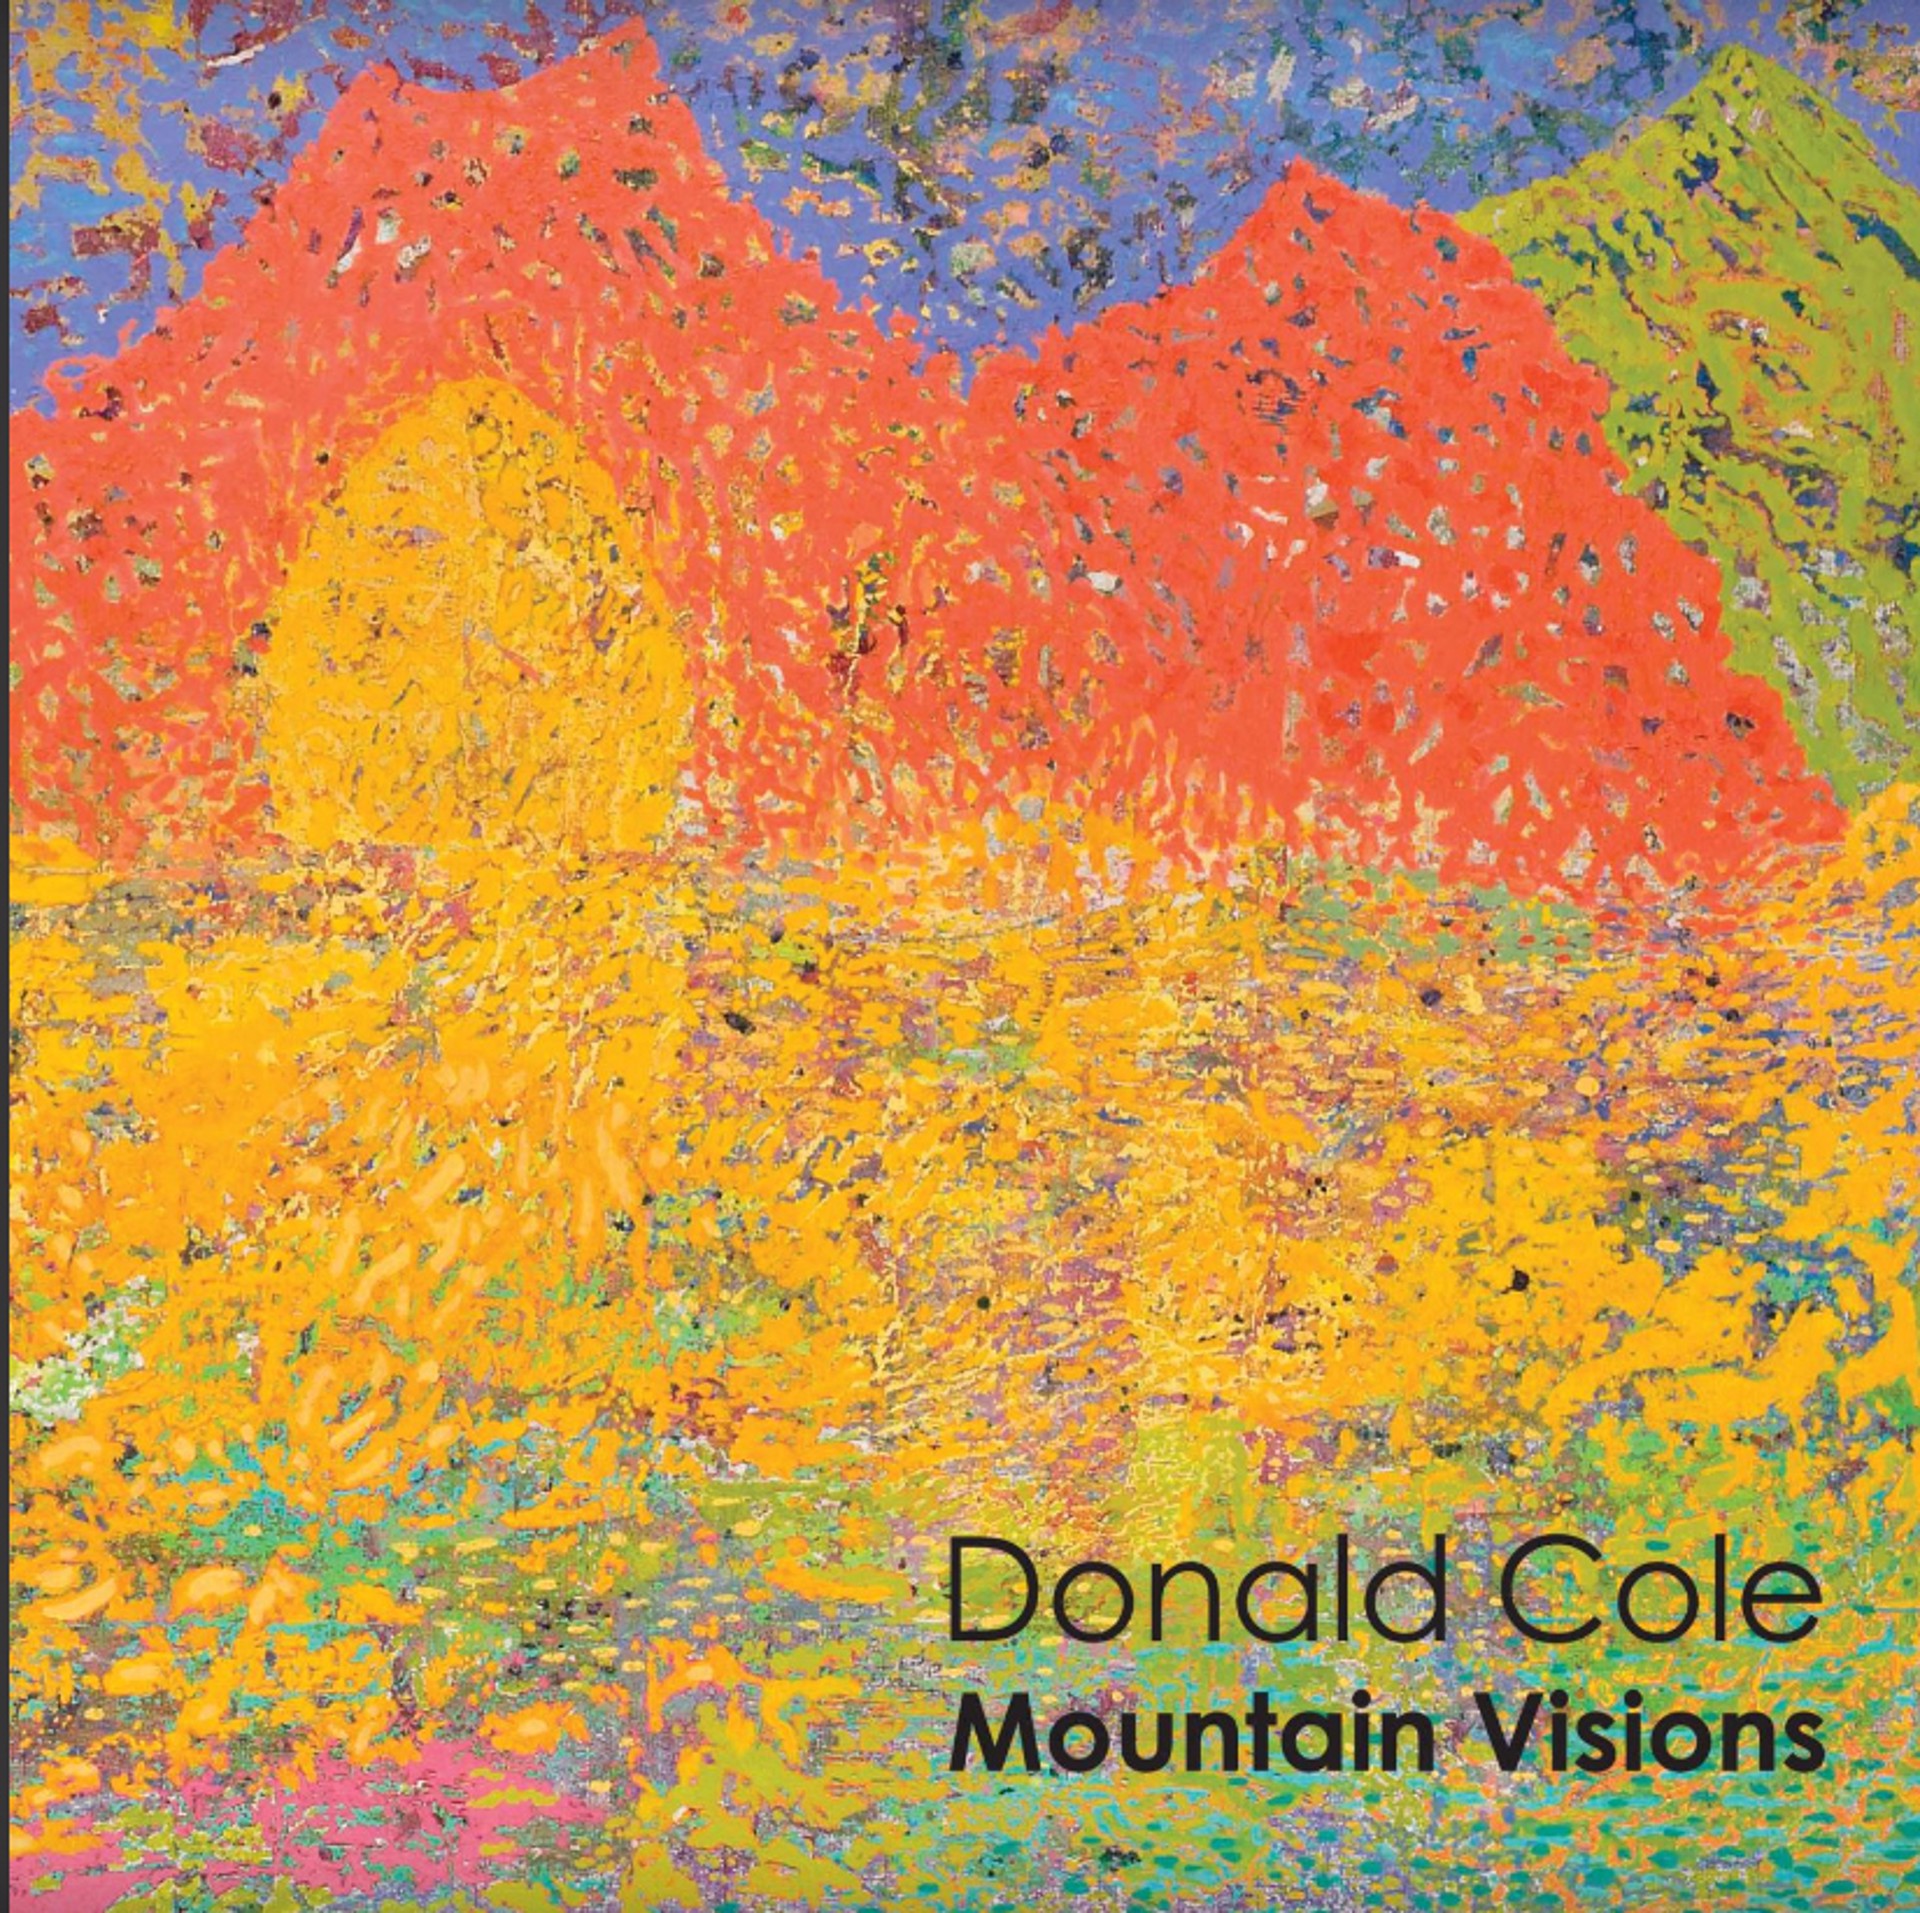 Mountain Visions | exhibition catalog by Donald Cole